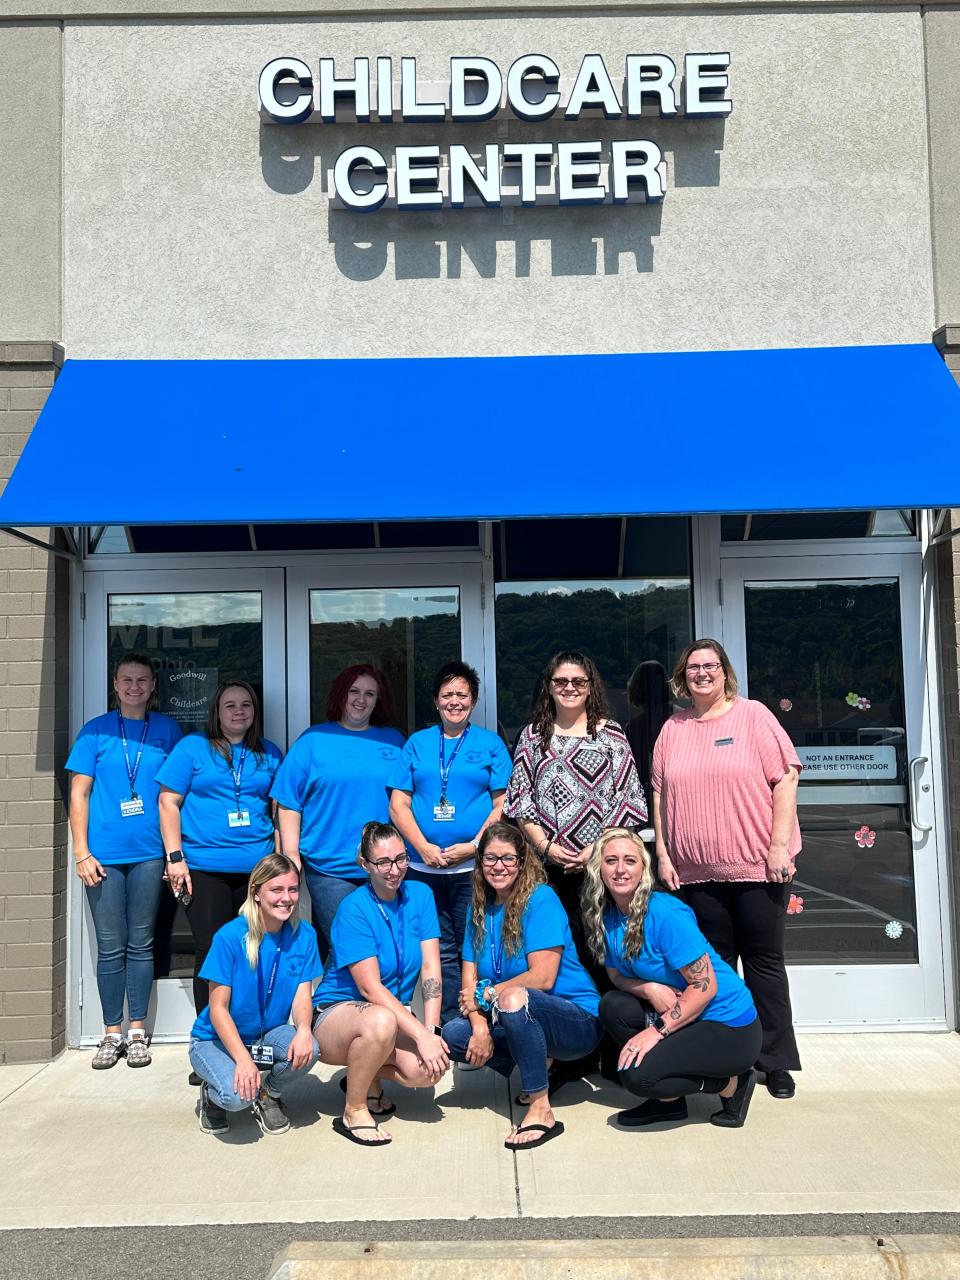 (Back L-R) Kendra Hupp, Chelsea Seymour, Melissa Lowry, Childcare Administrative Assistant Denise Murphy, Childcare Administrator Mary Anne Queen, Missions Coordinator Cana Horner 
(Front L-R) Rachel Walls, Sierra Armstrong, Stacey Caressi, Katie Gee